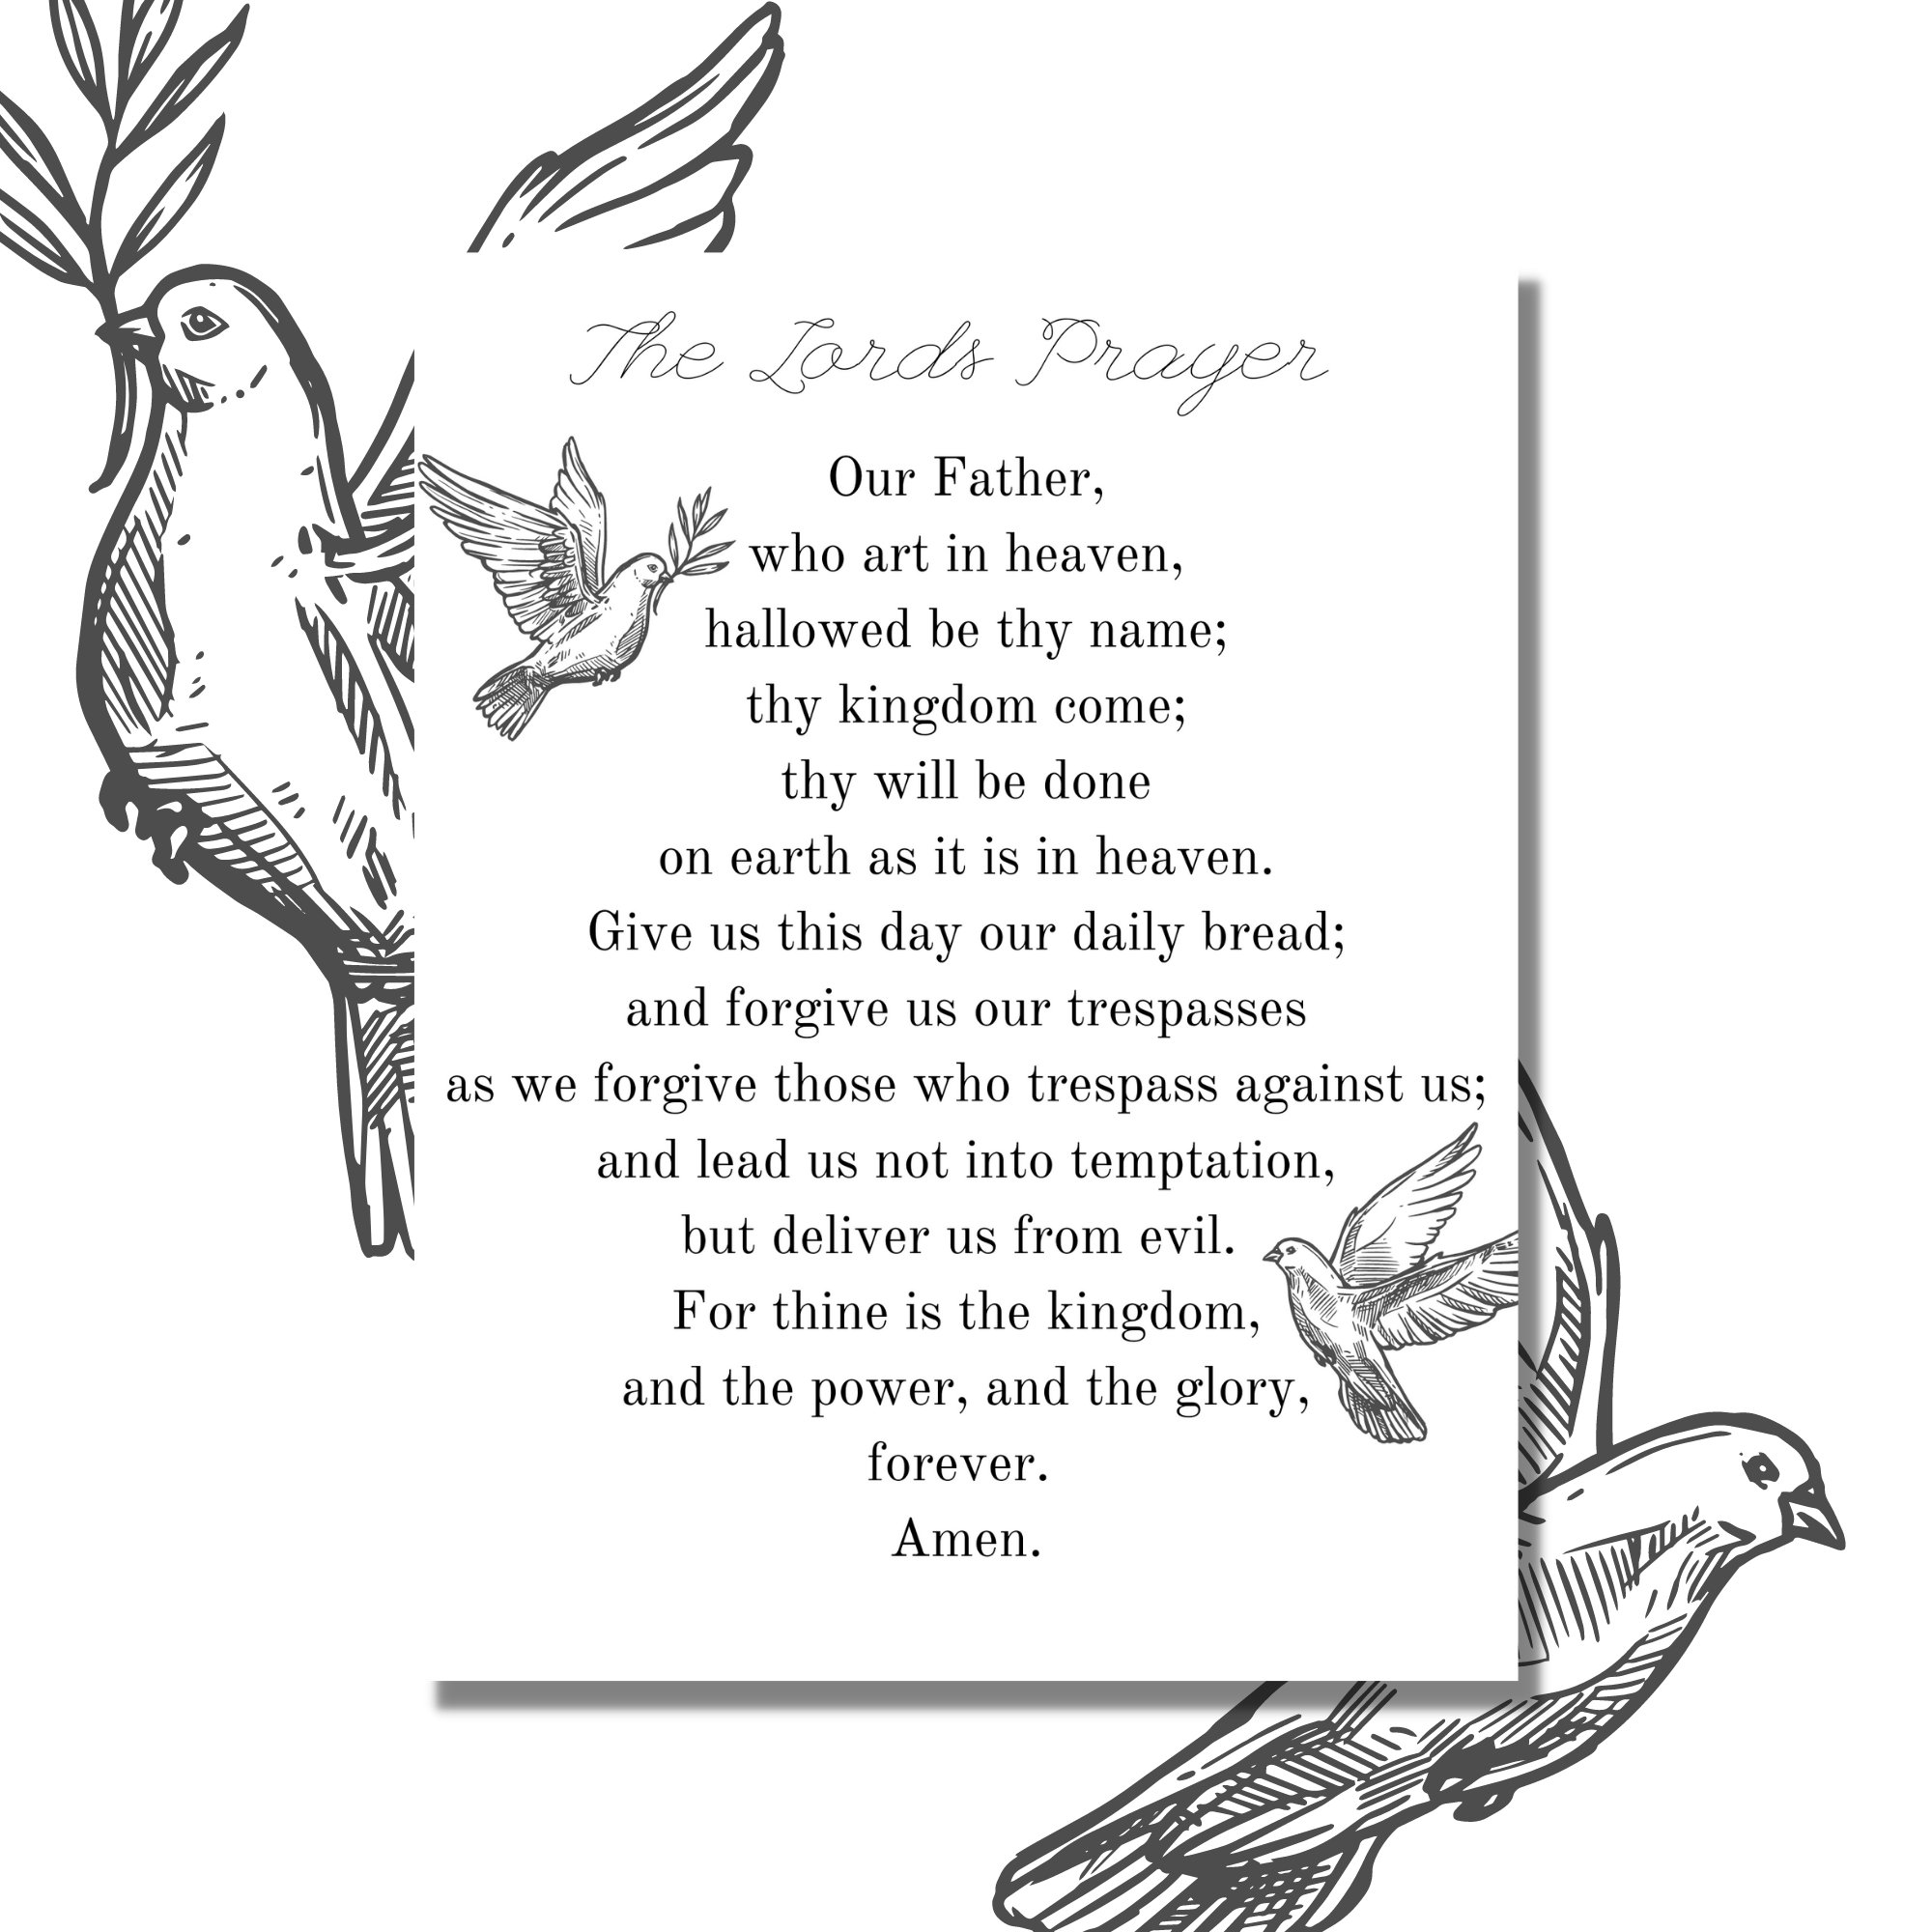 images-of-the-lord-s-prayer-the-lord-s-prayer-free-printable-download-the-lords-prayer